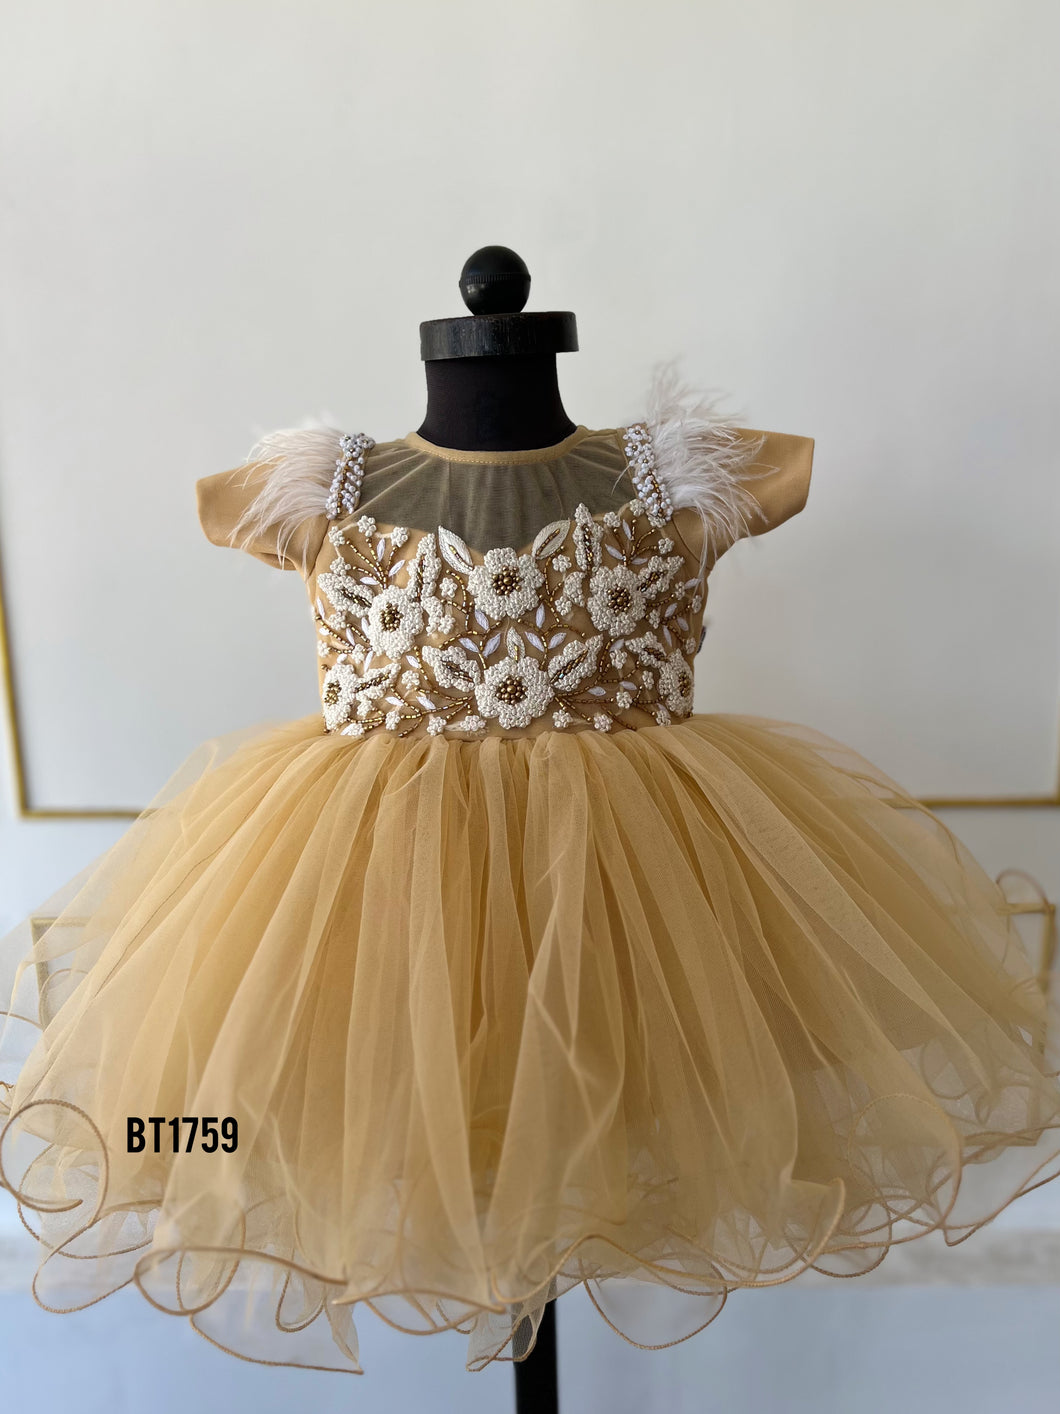 BT1759 Golden Elegance Embroidered Baby Party Dress - Regal Gold Collection